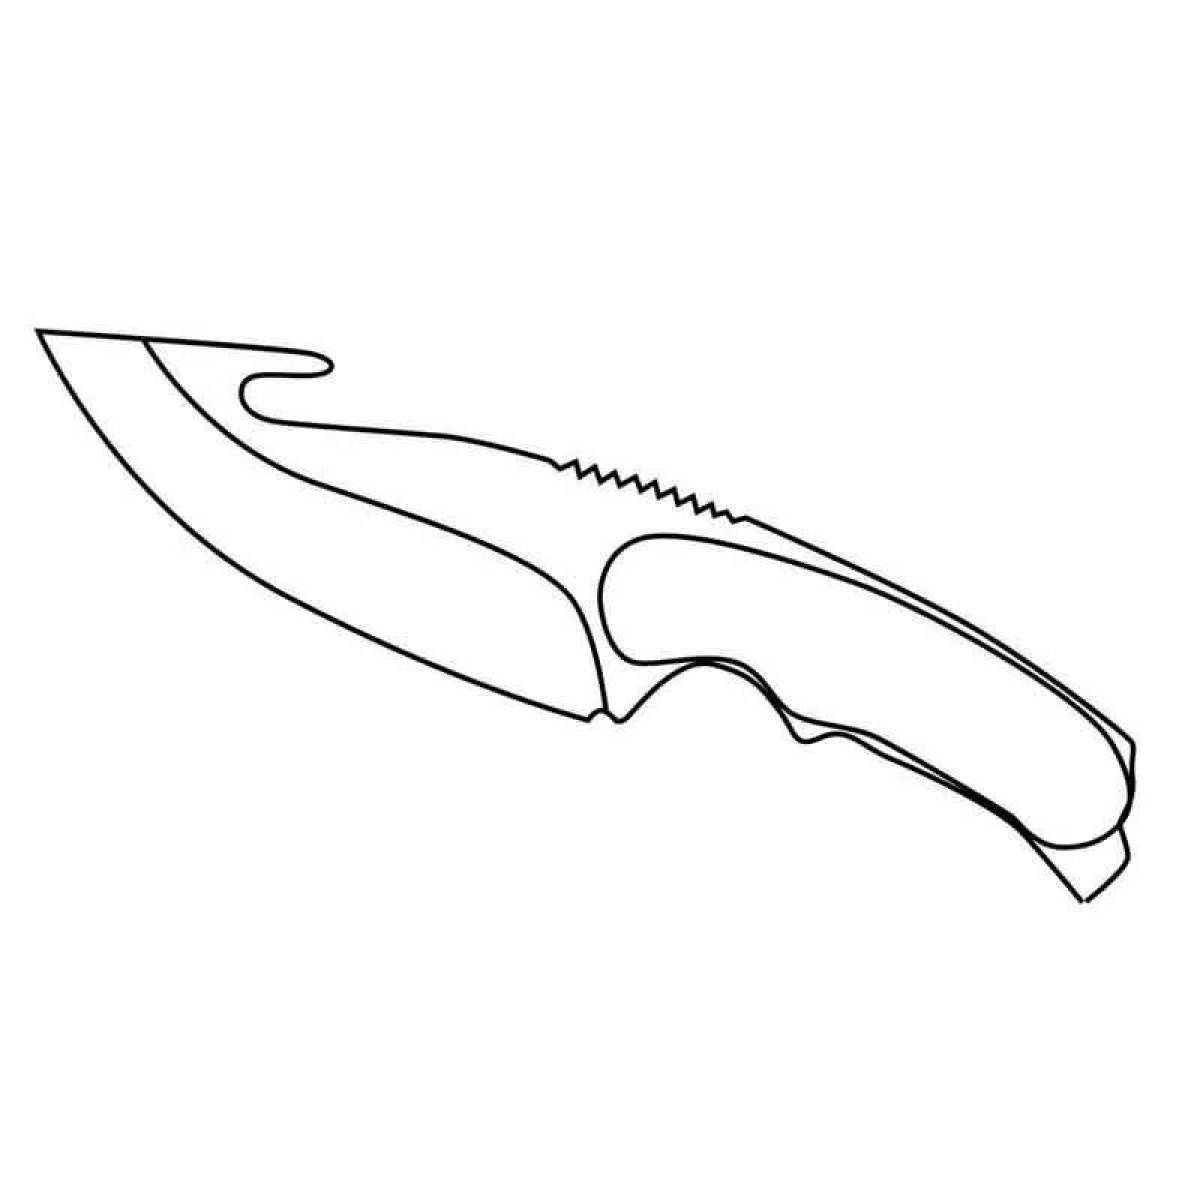 Polished knife from standoff 2 coloring page